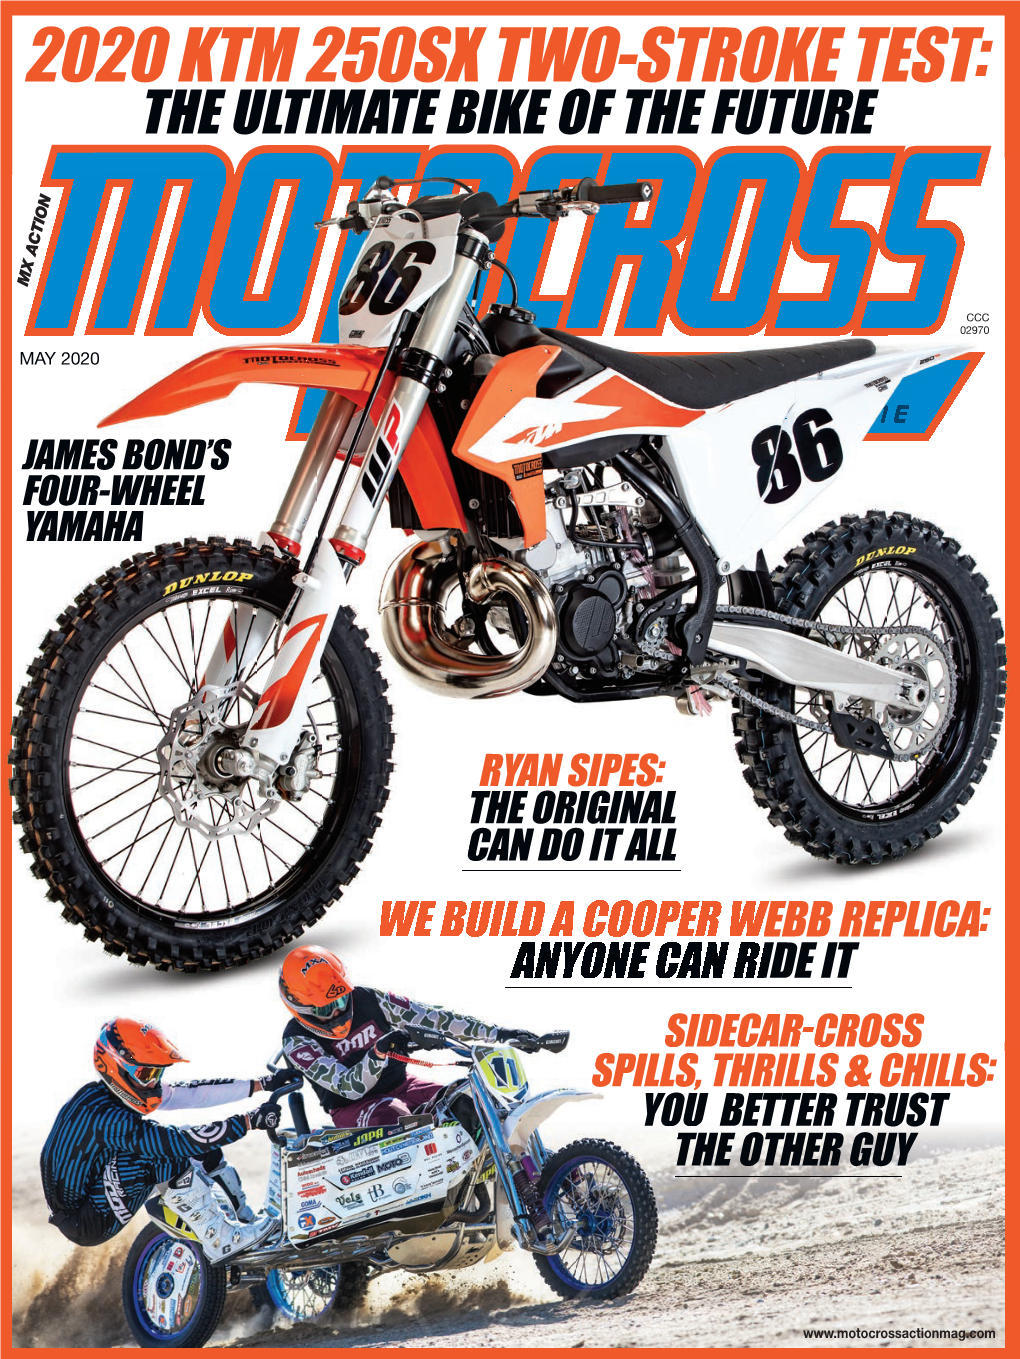 2020 Ktm 250Sx Two-Stroke Test: the Ultimate Bike of the Future Motocross Action • May 2020 •